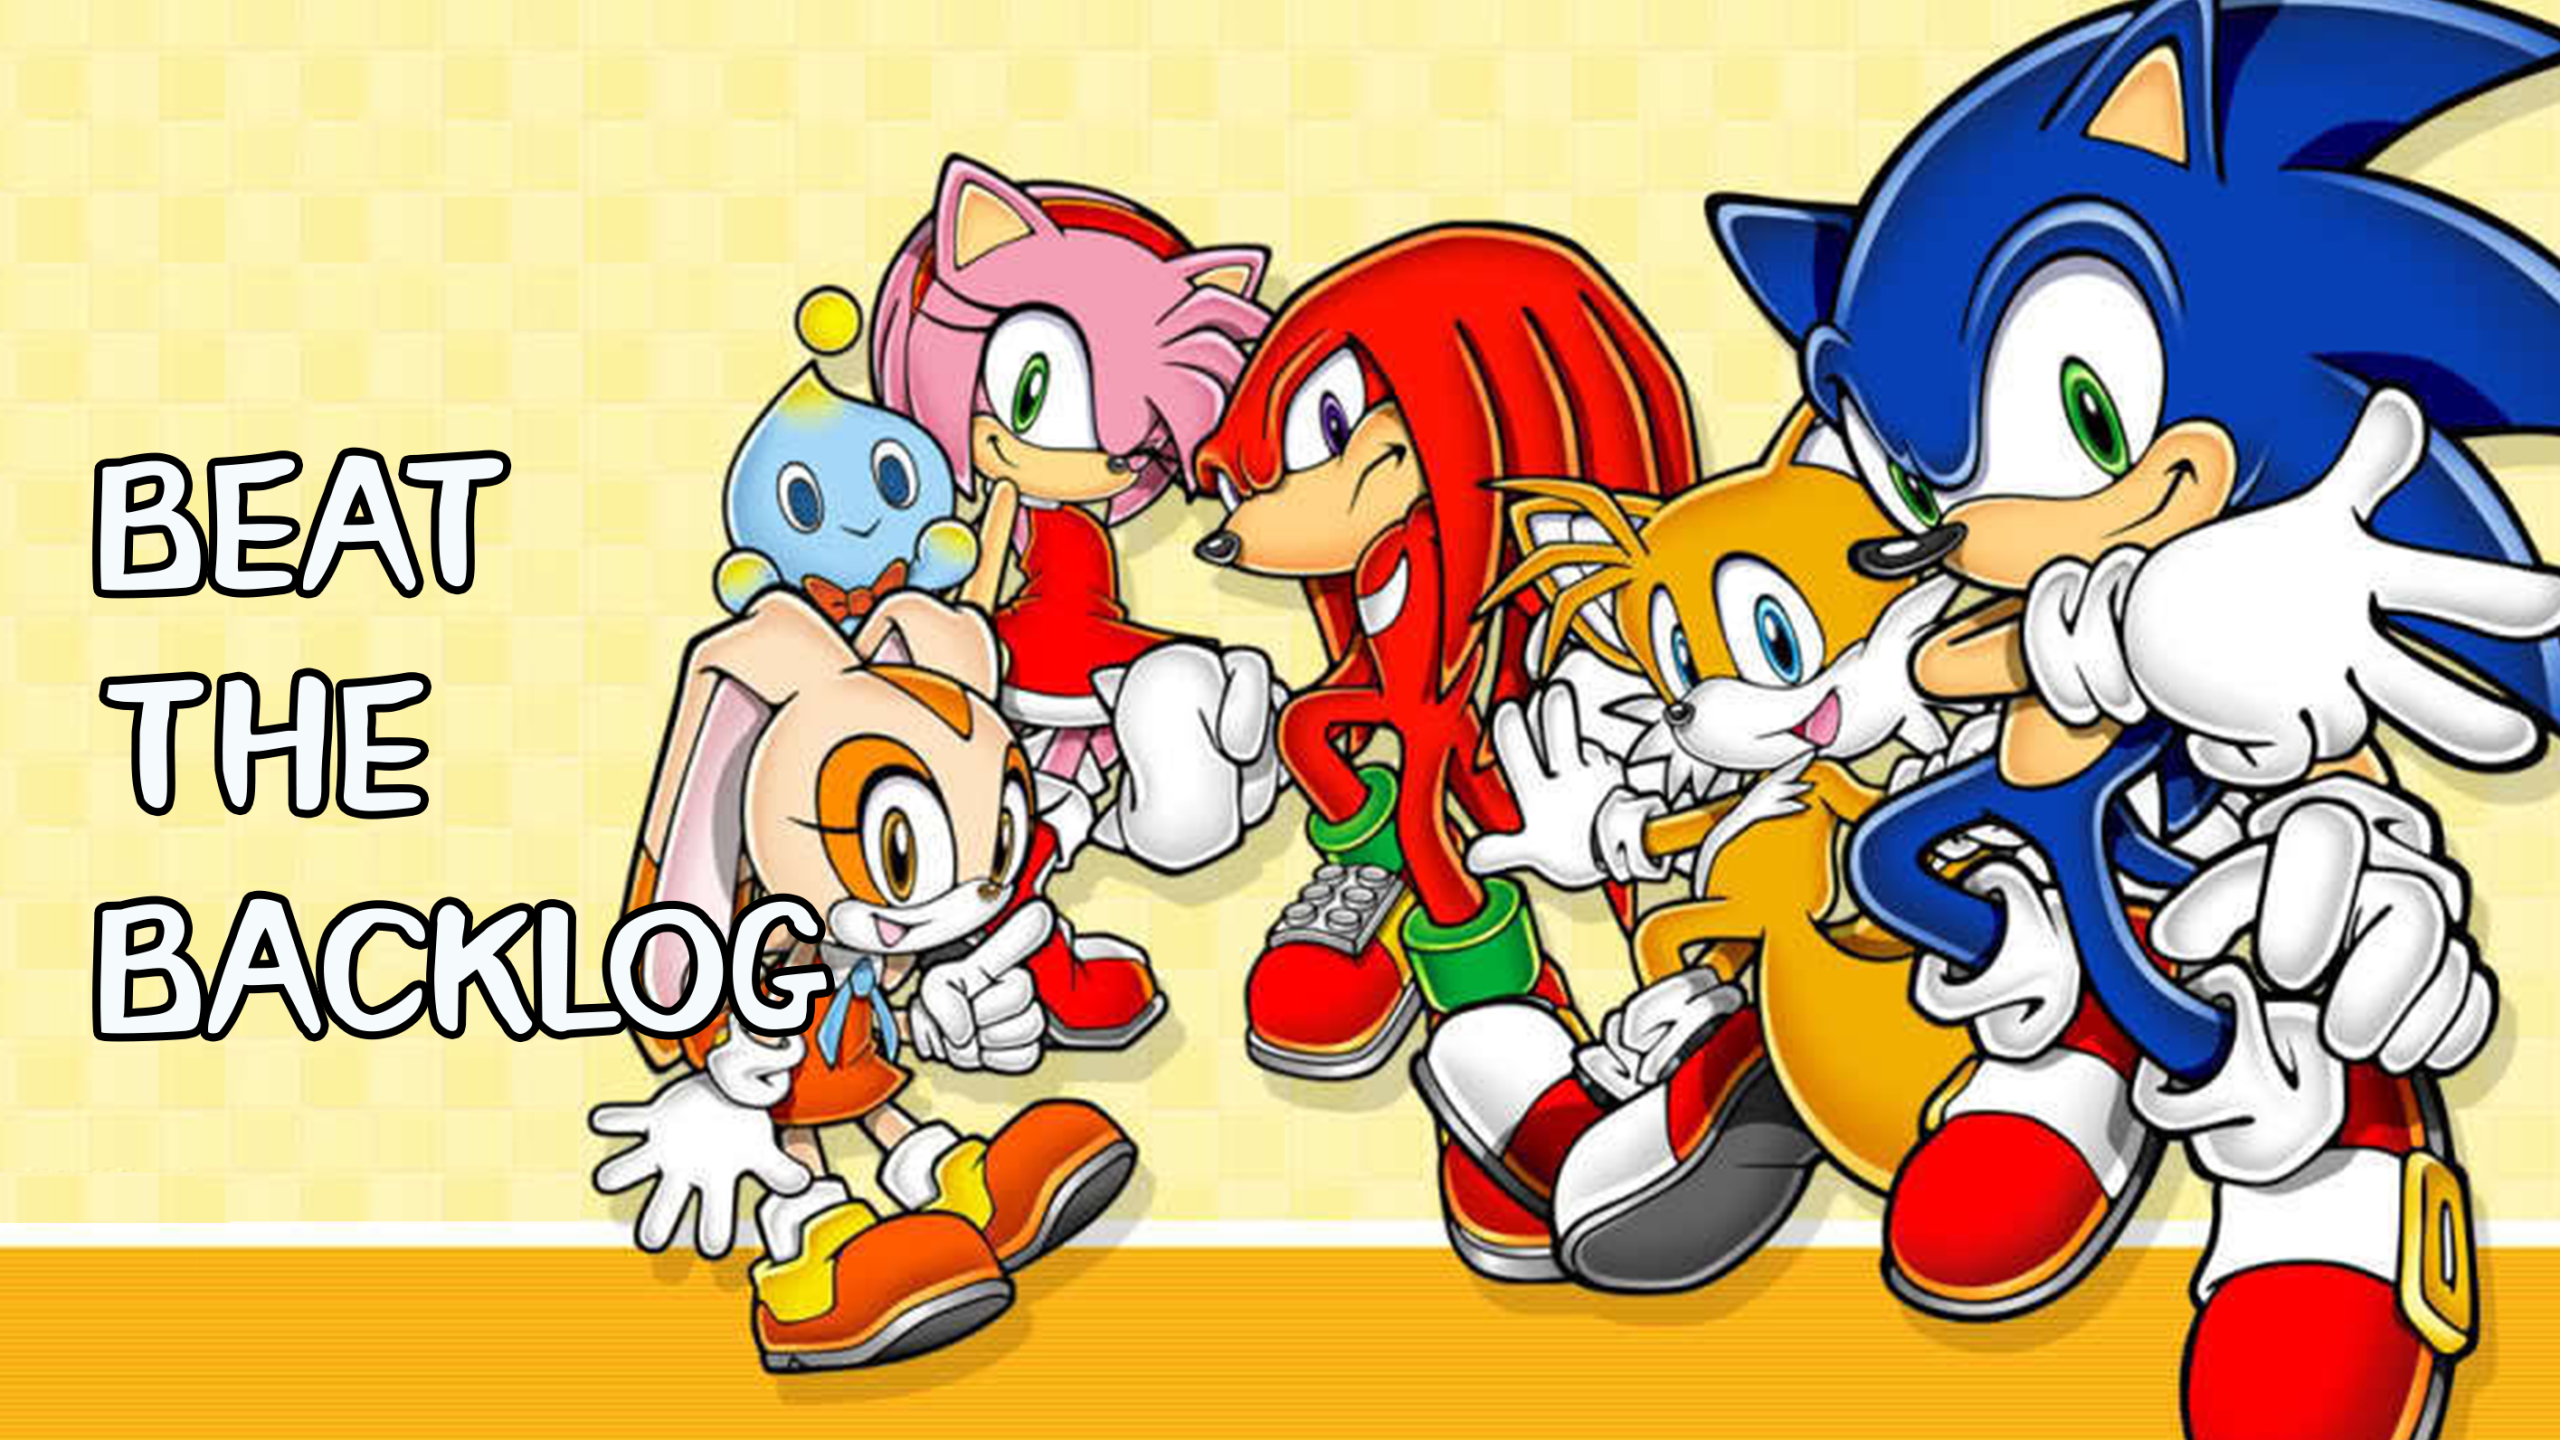 SONIC ADVANCE 3 - All Zones (As Sonic) 